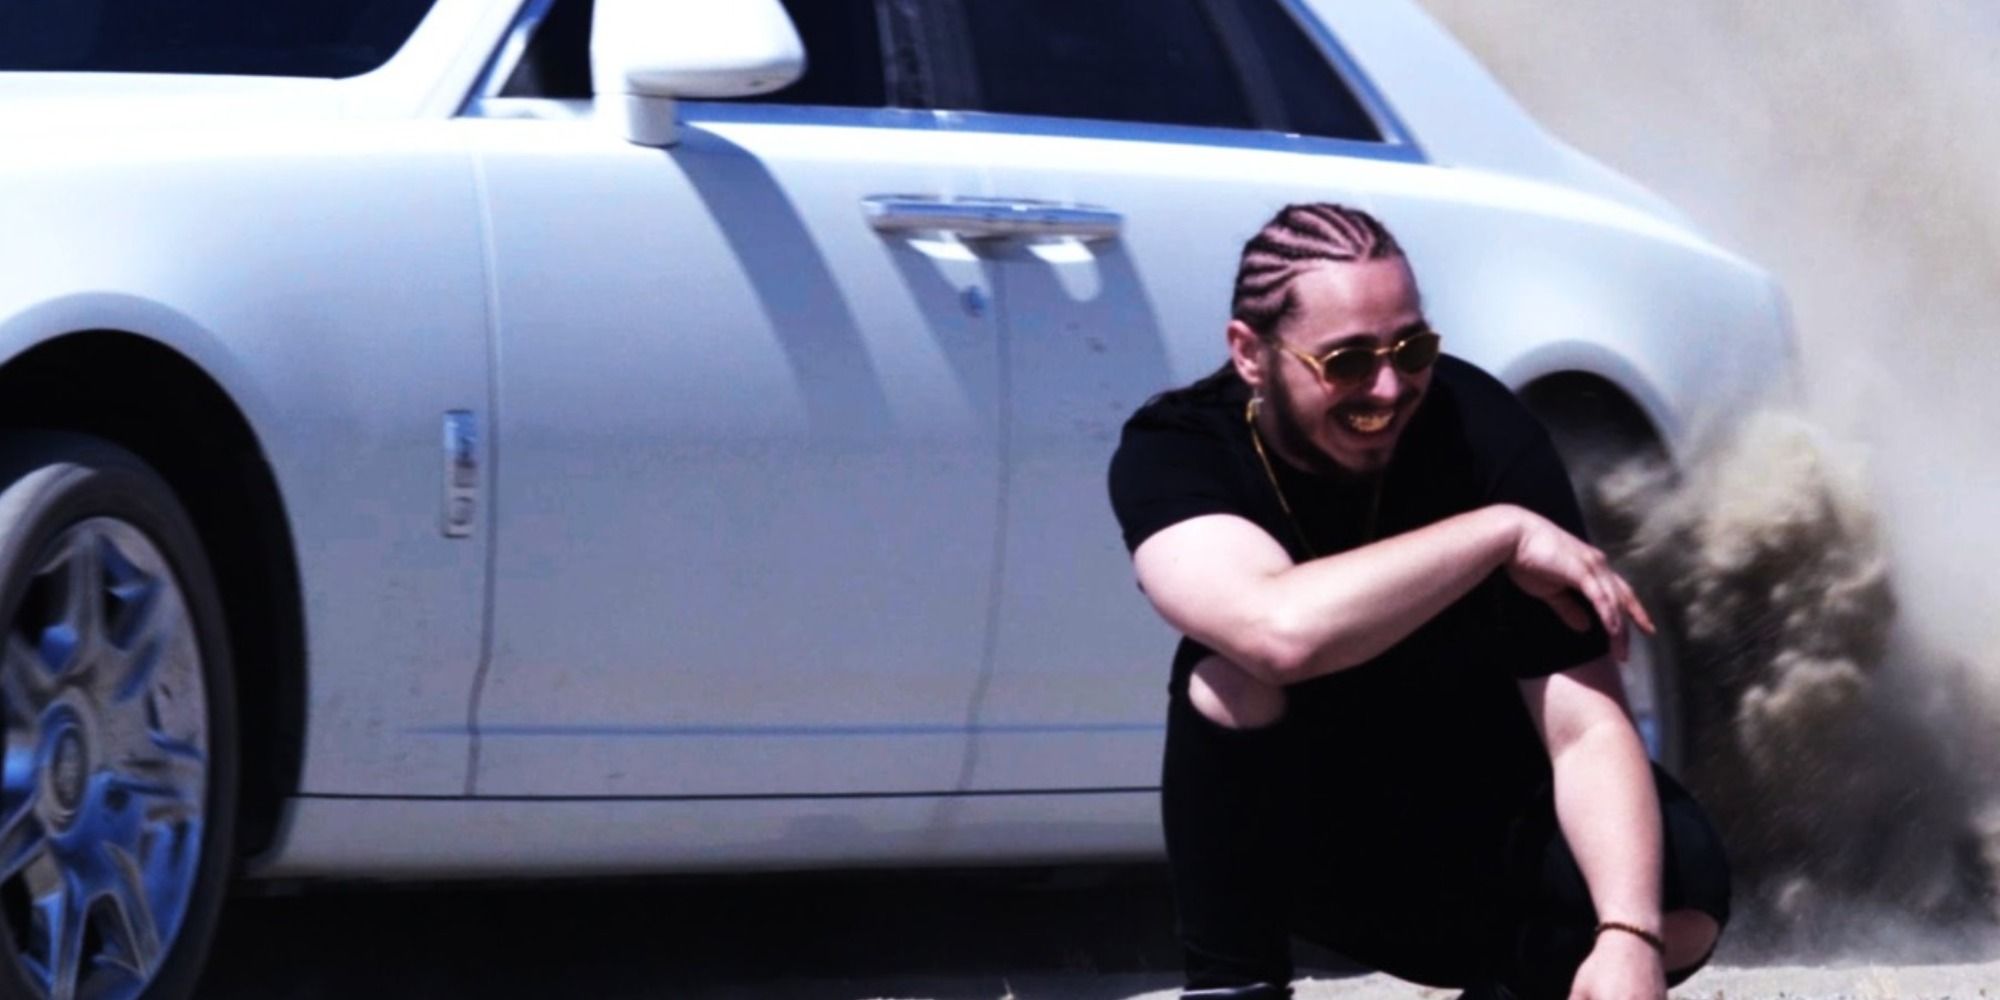 Post Malone having fun in the White Iverson music video.